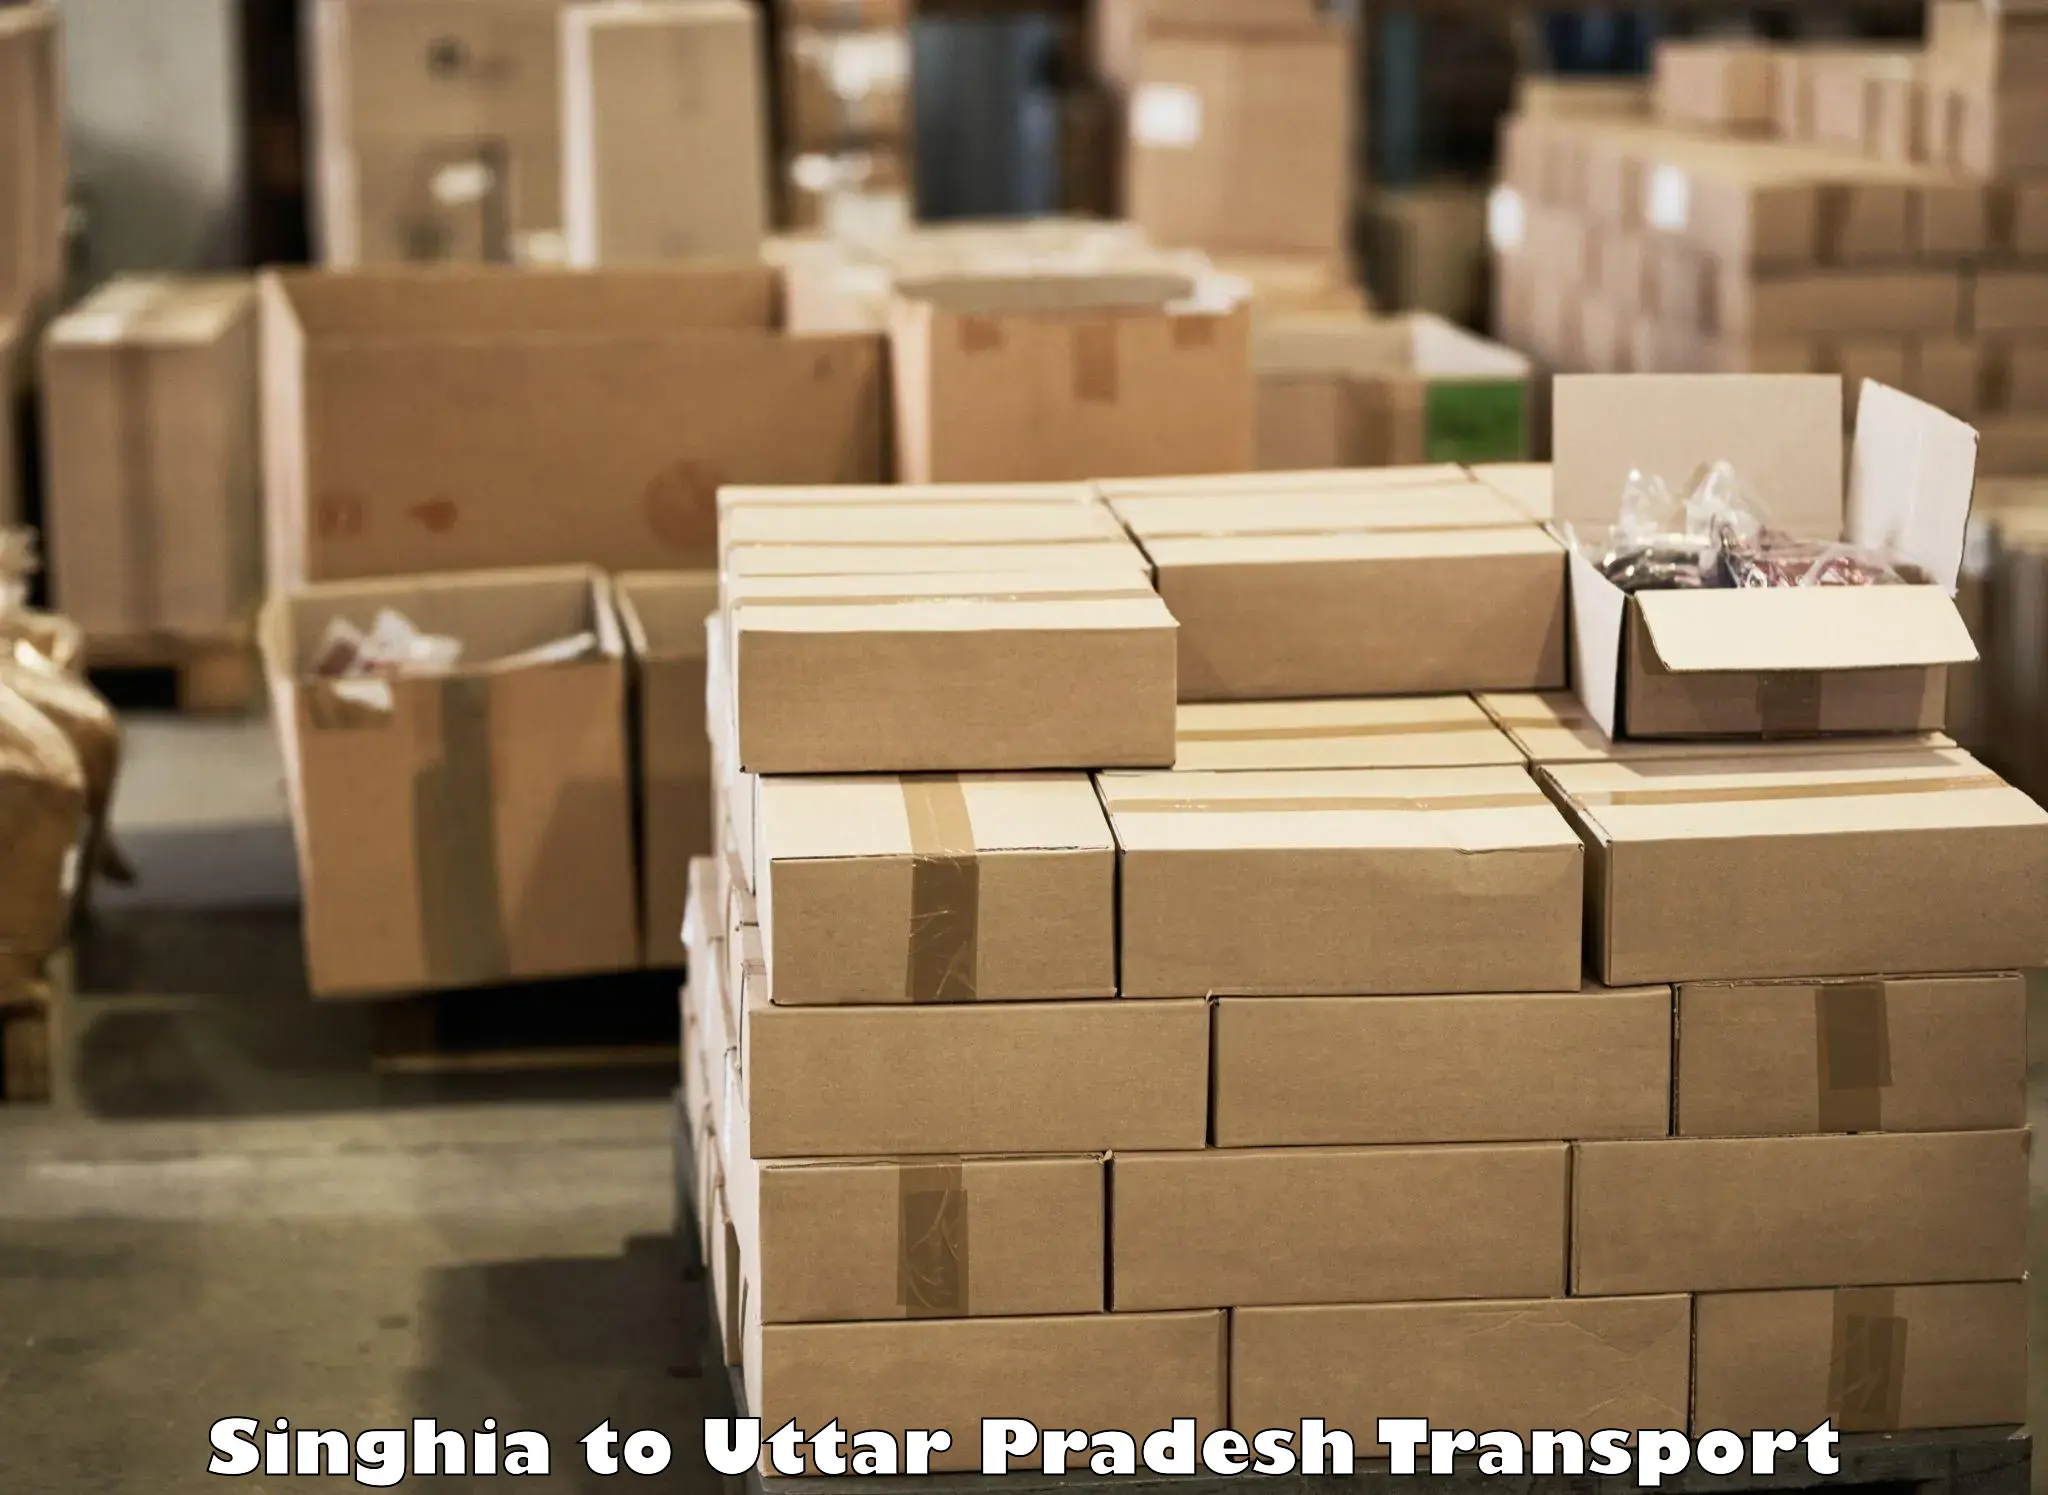 Daily transport service in Singhia to Lucknow